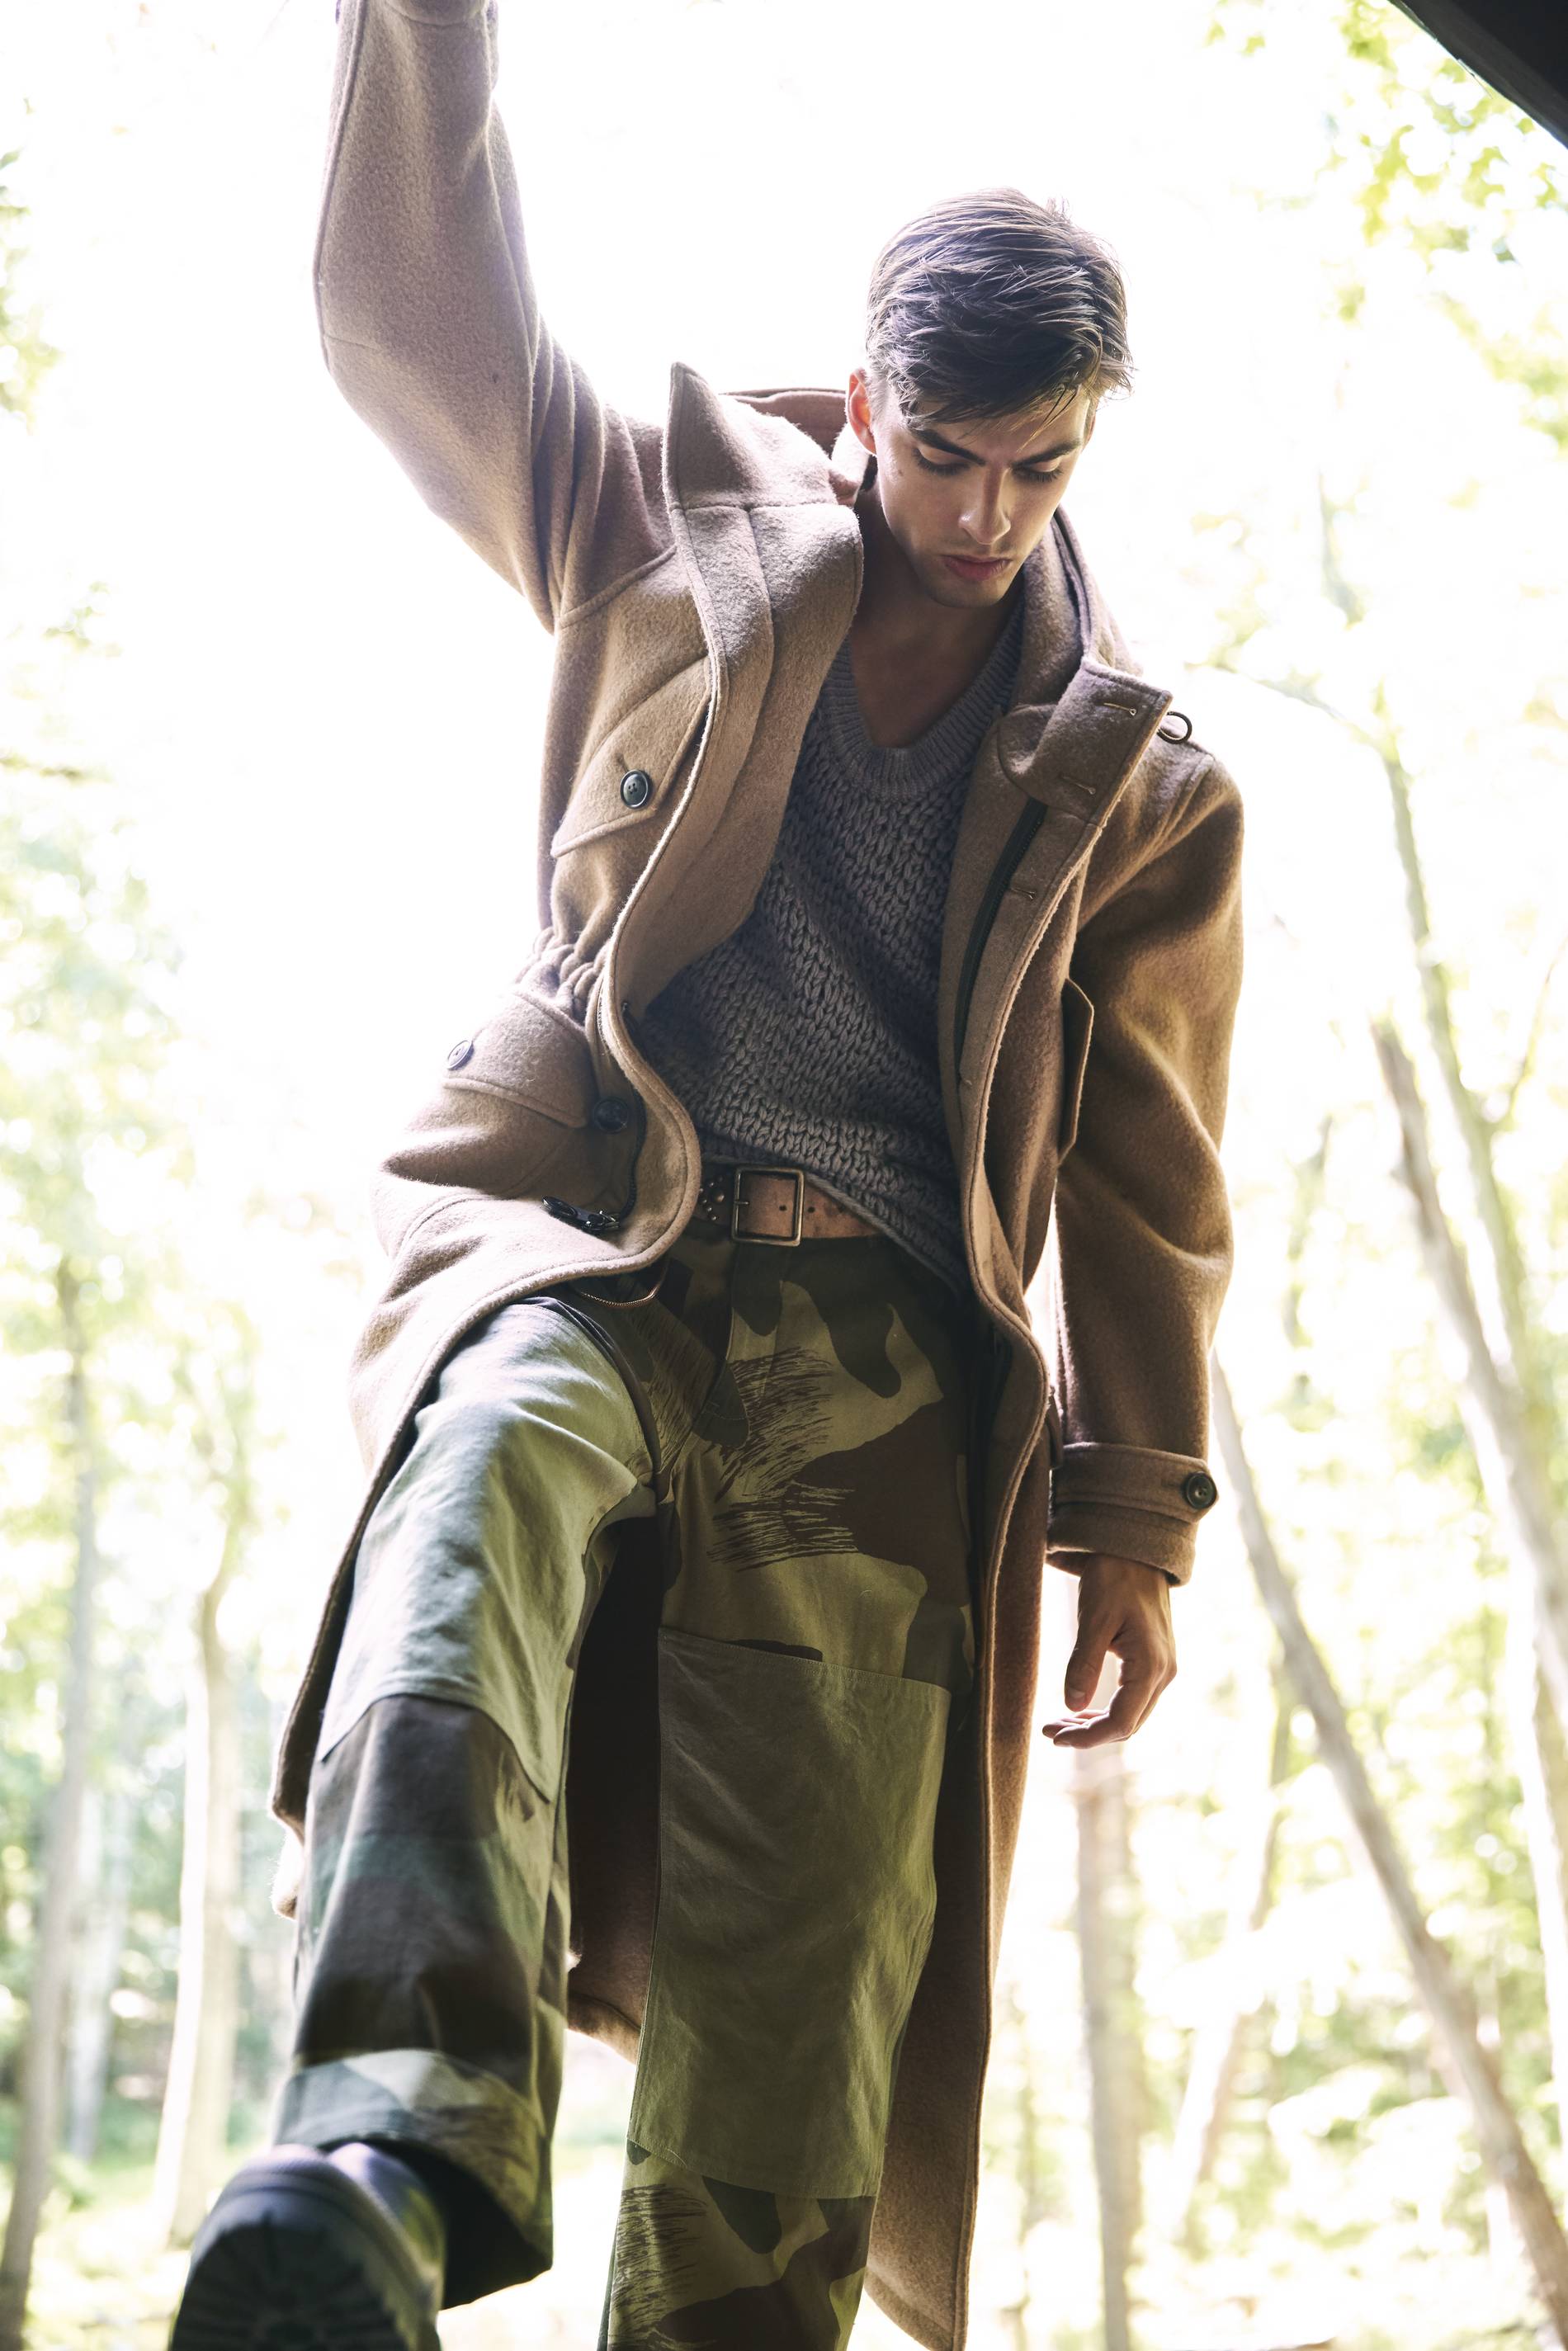 Todd Snyder camel coat and camouflage pants